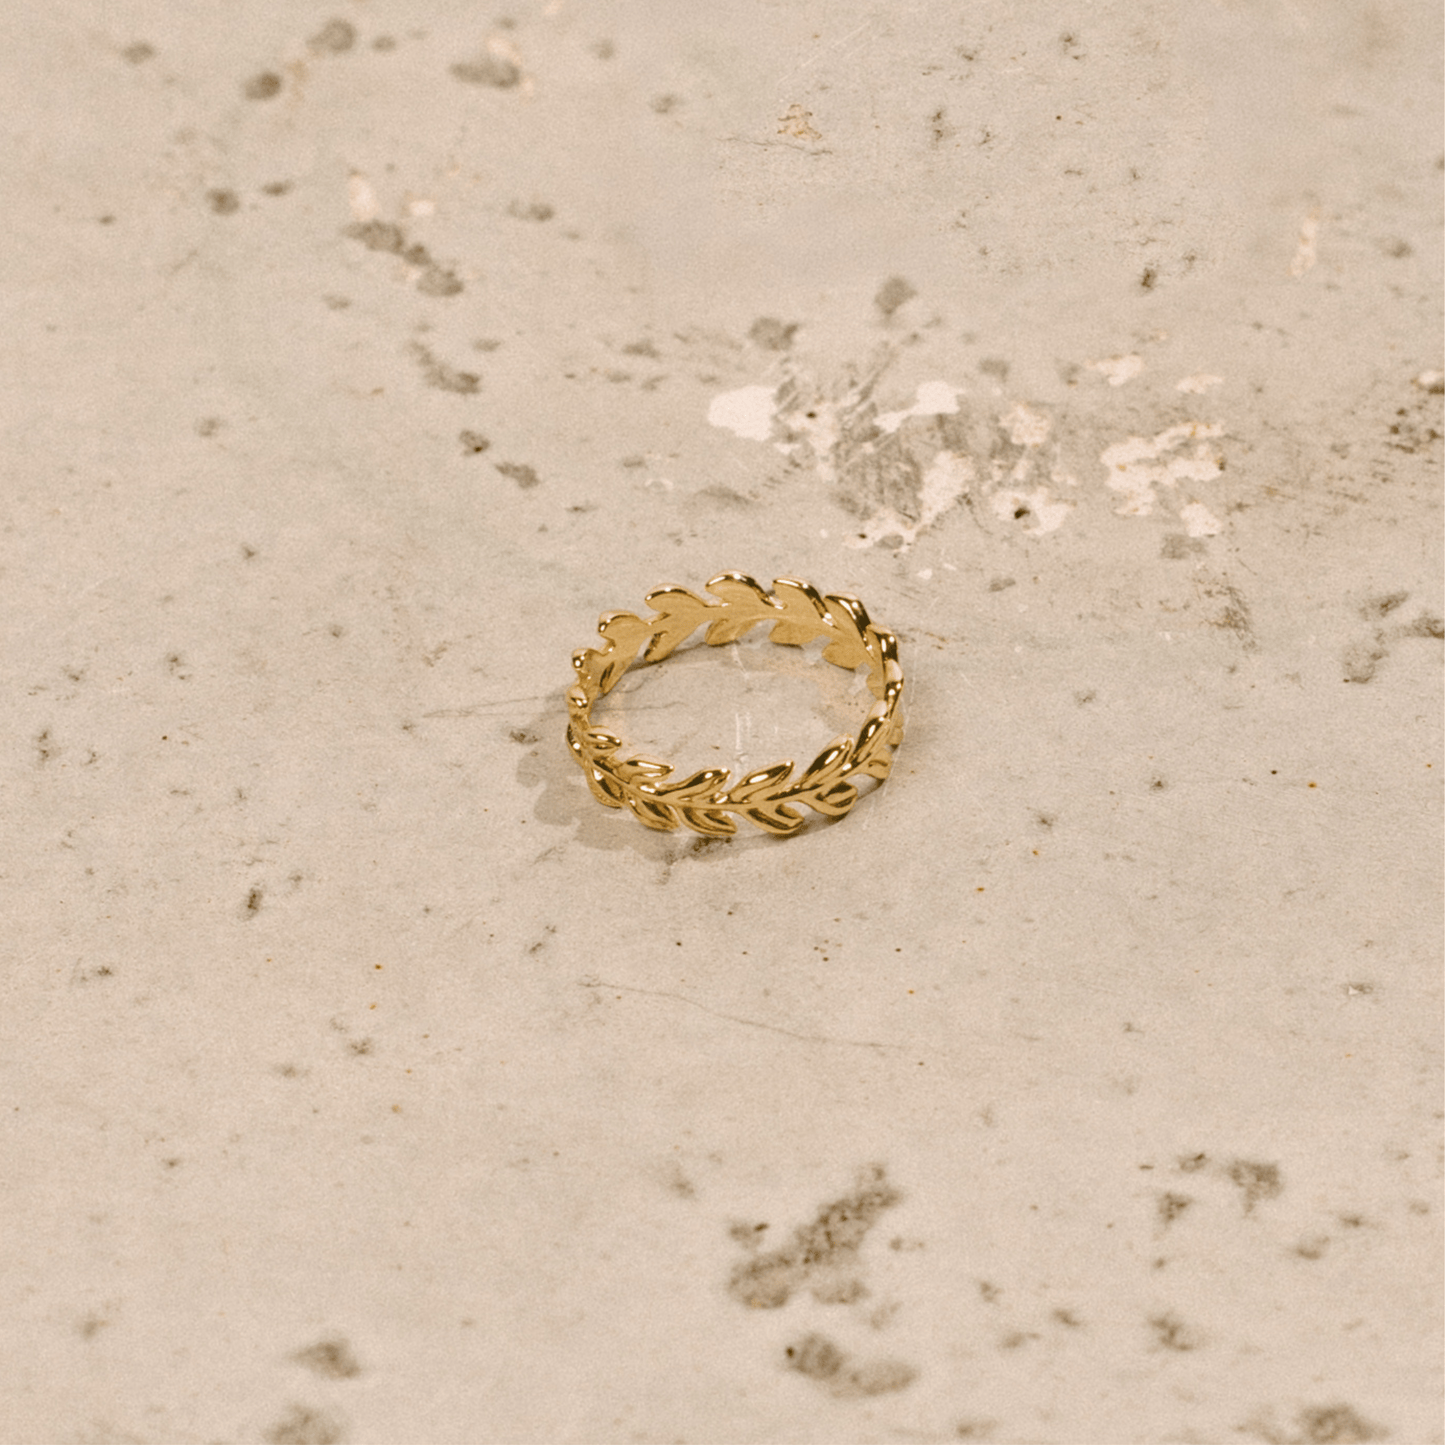 The crown of leaves ring is a golden band shaped like a laurel crown.